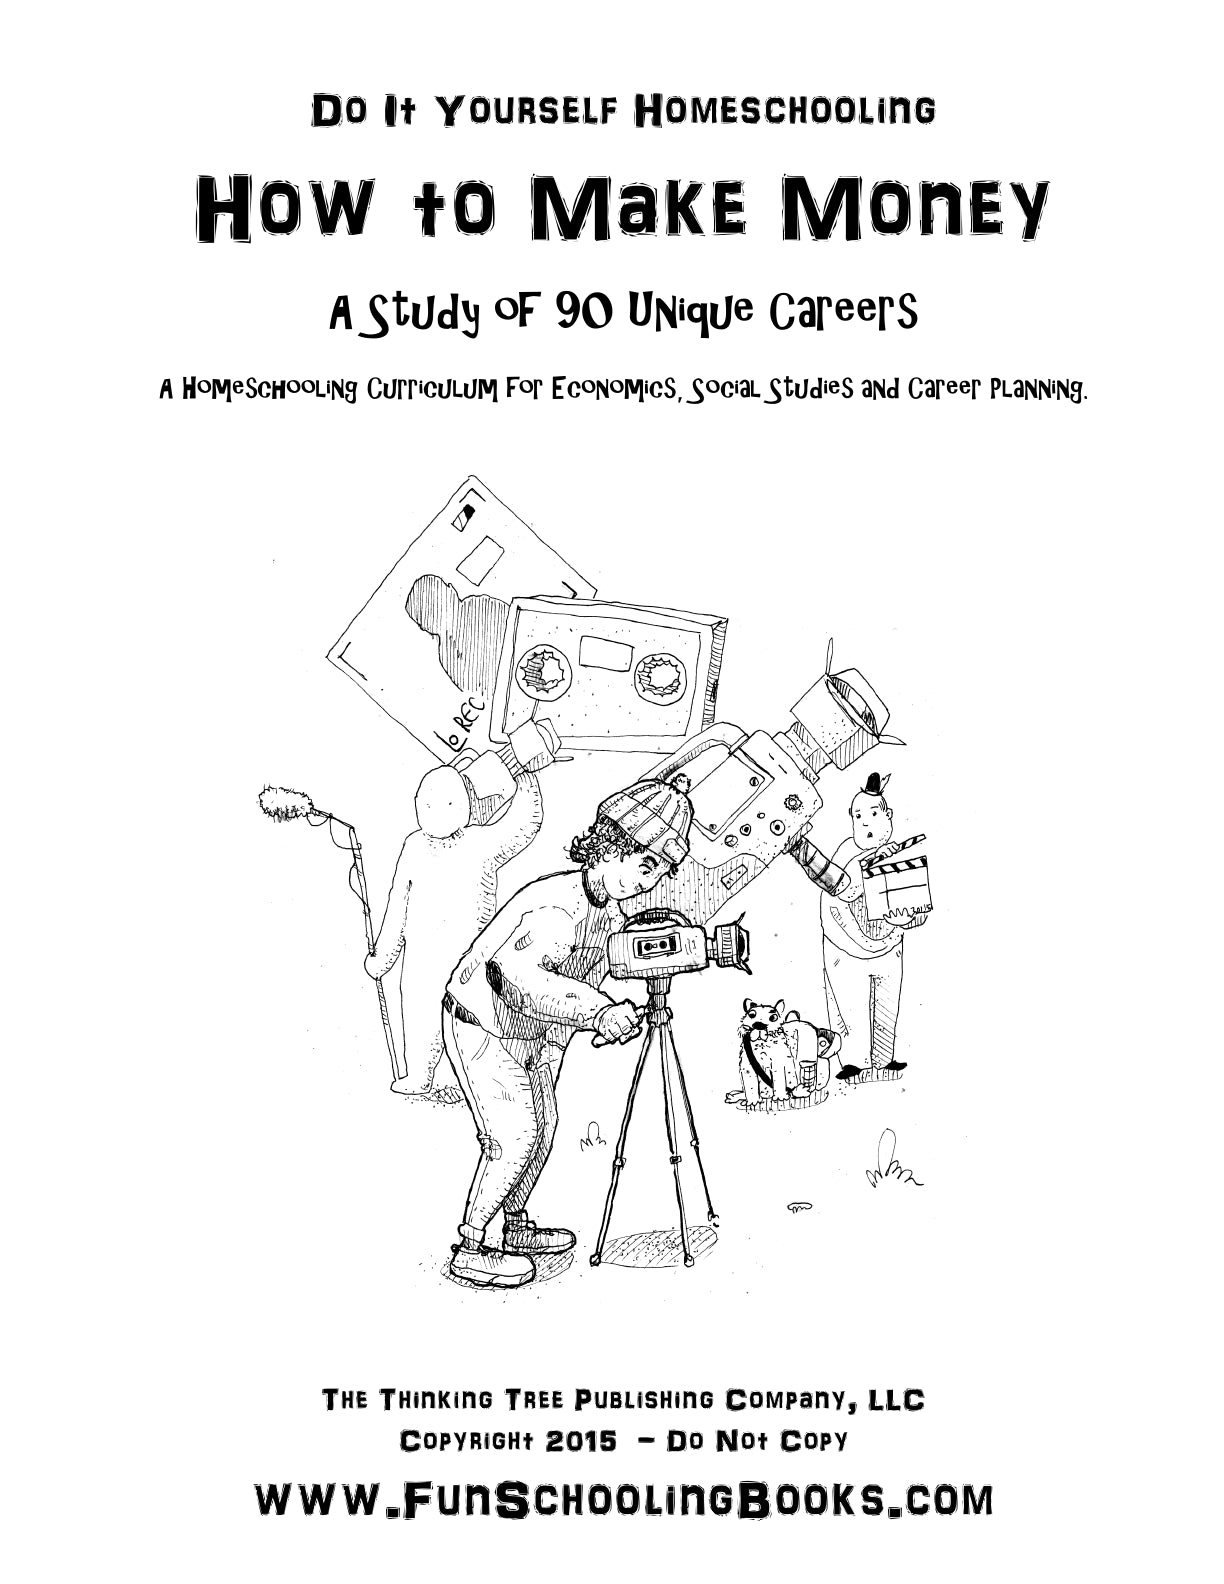 (Age 10+) How to Make Money - Handbook for Teens, Kids & Young Adults